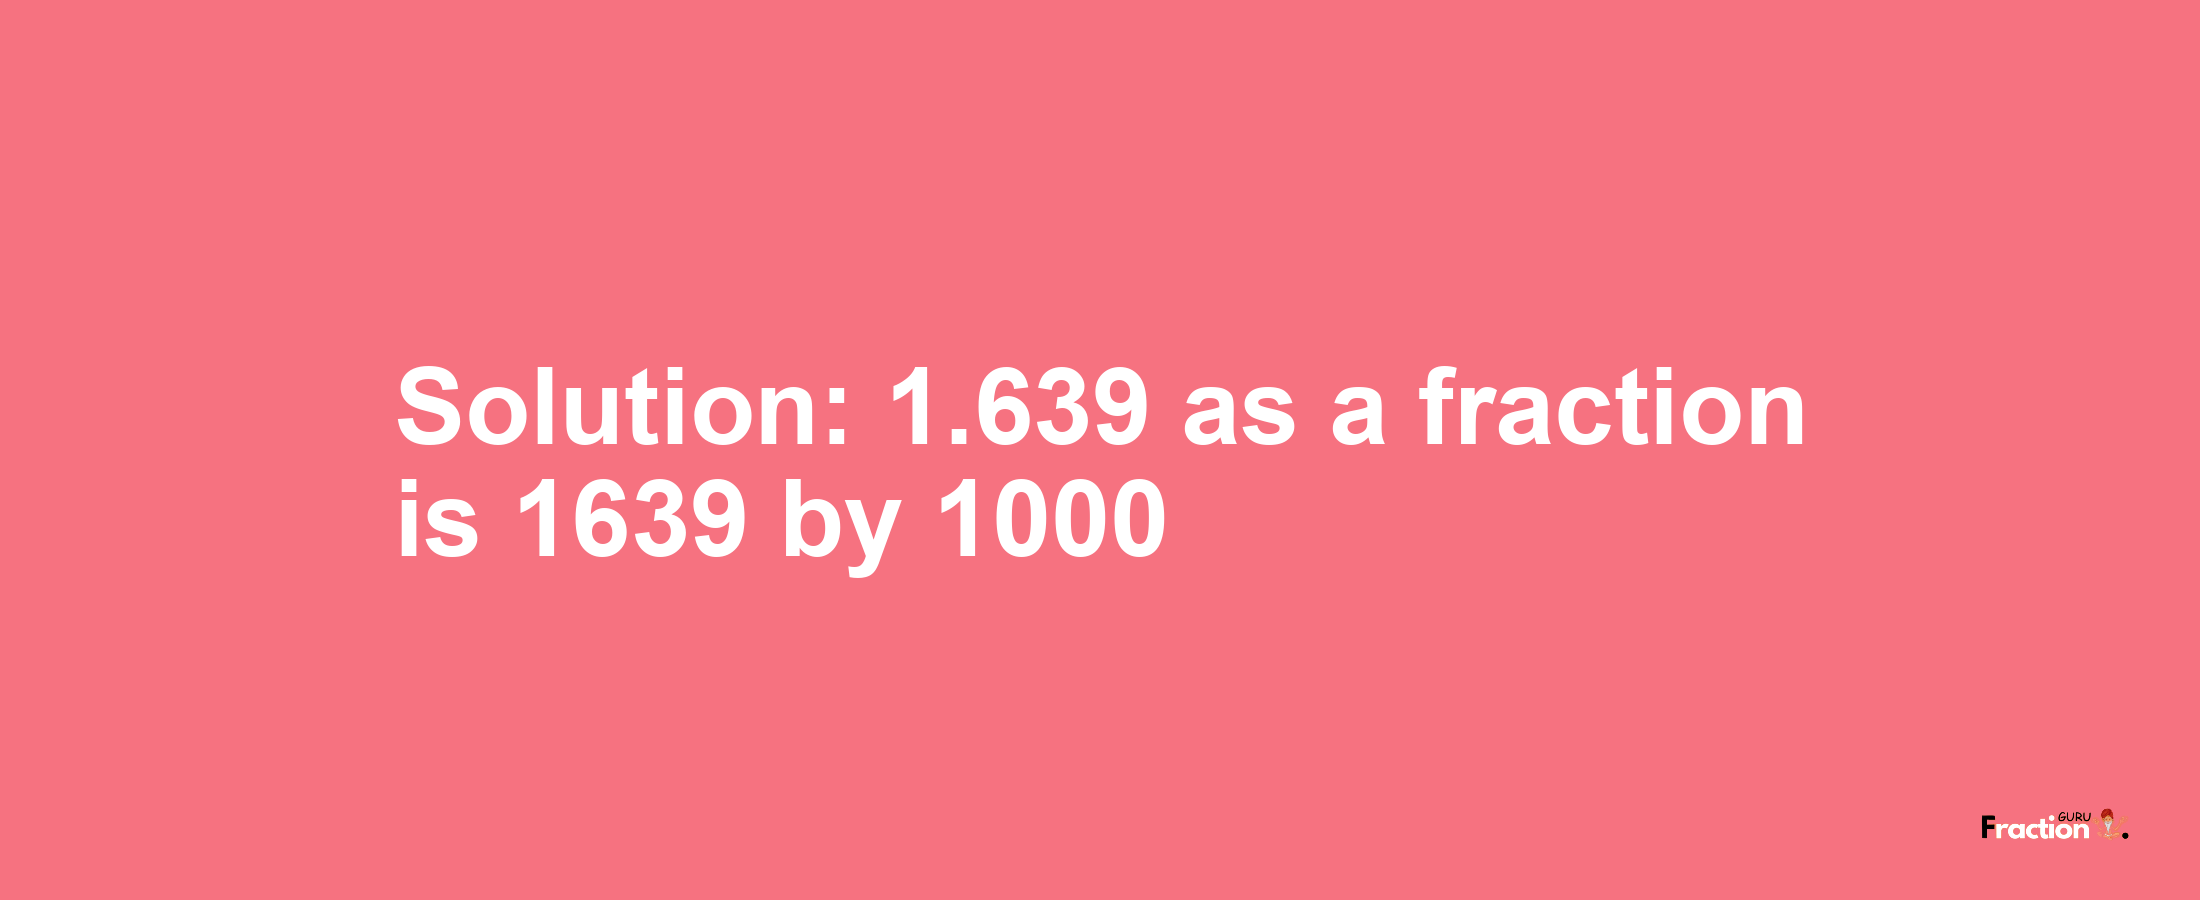 Solution:1.639 as a fraction is 1639/1000